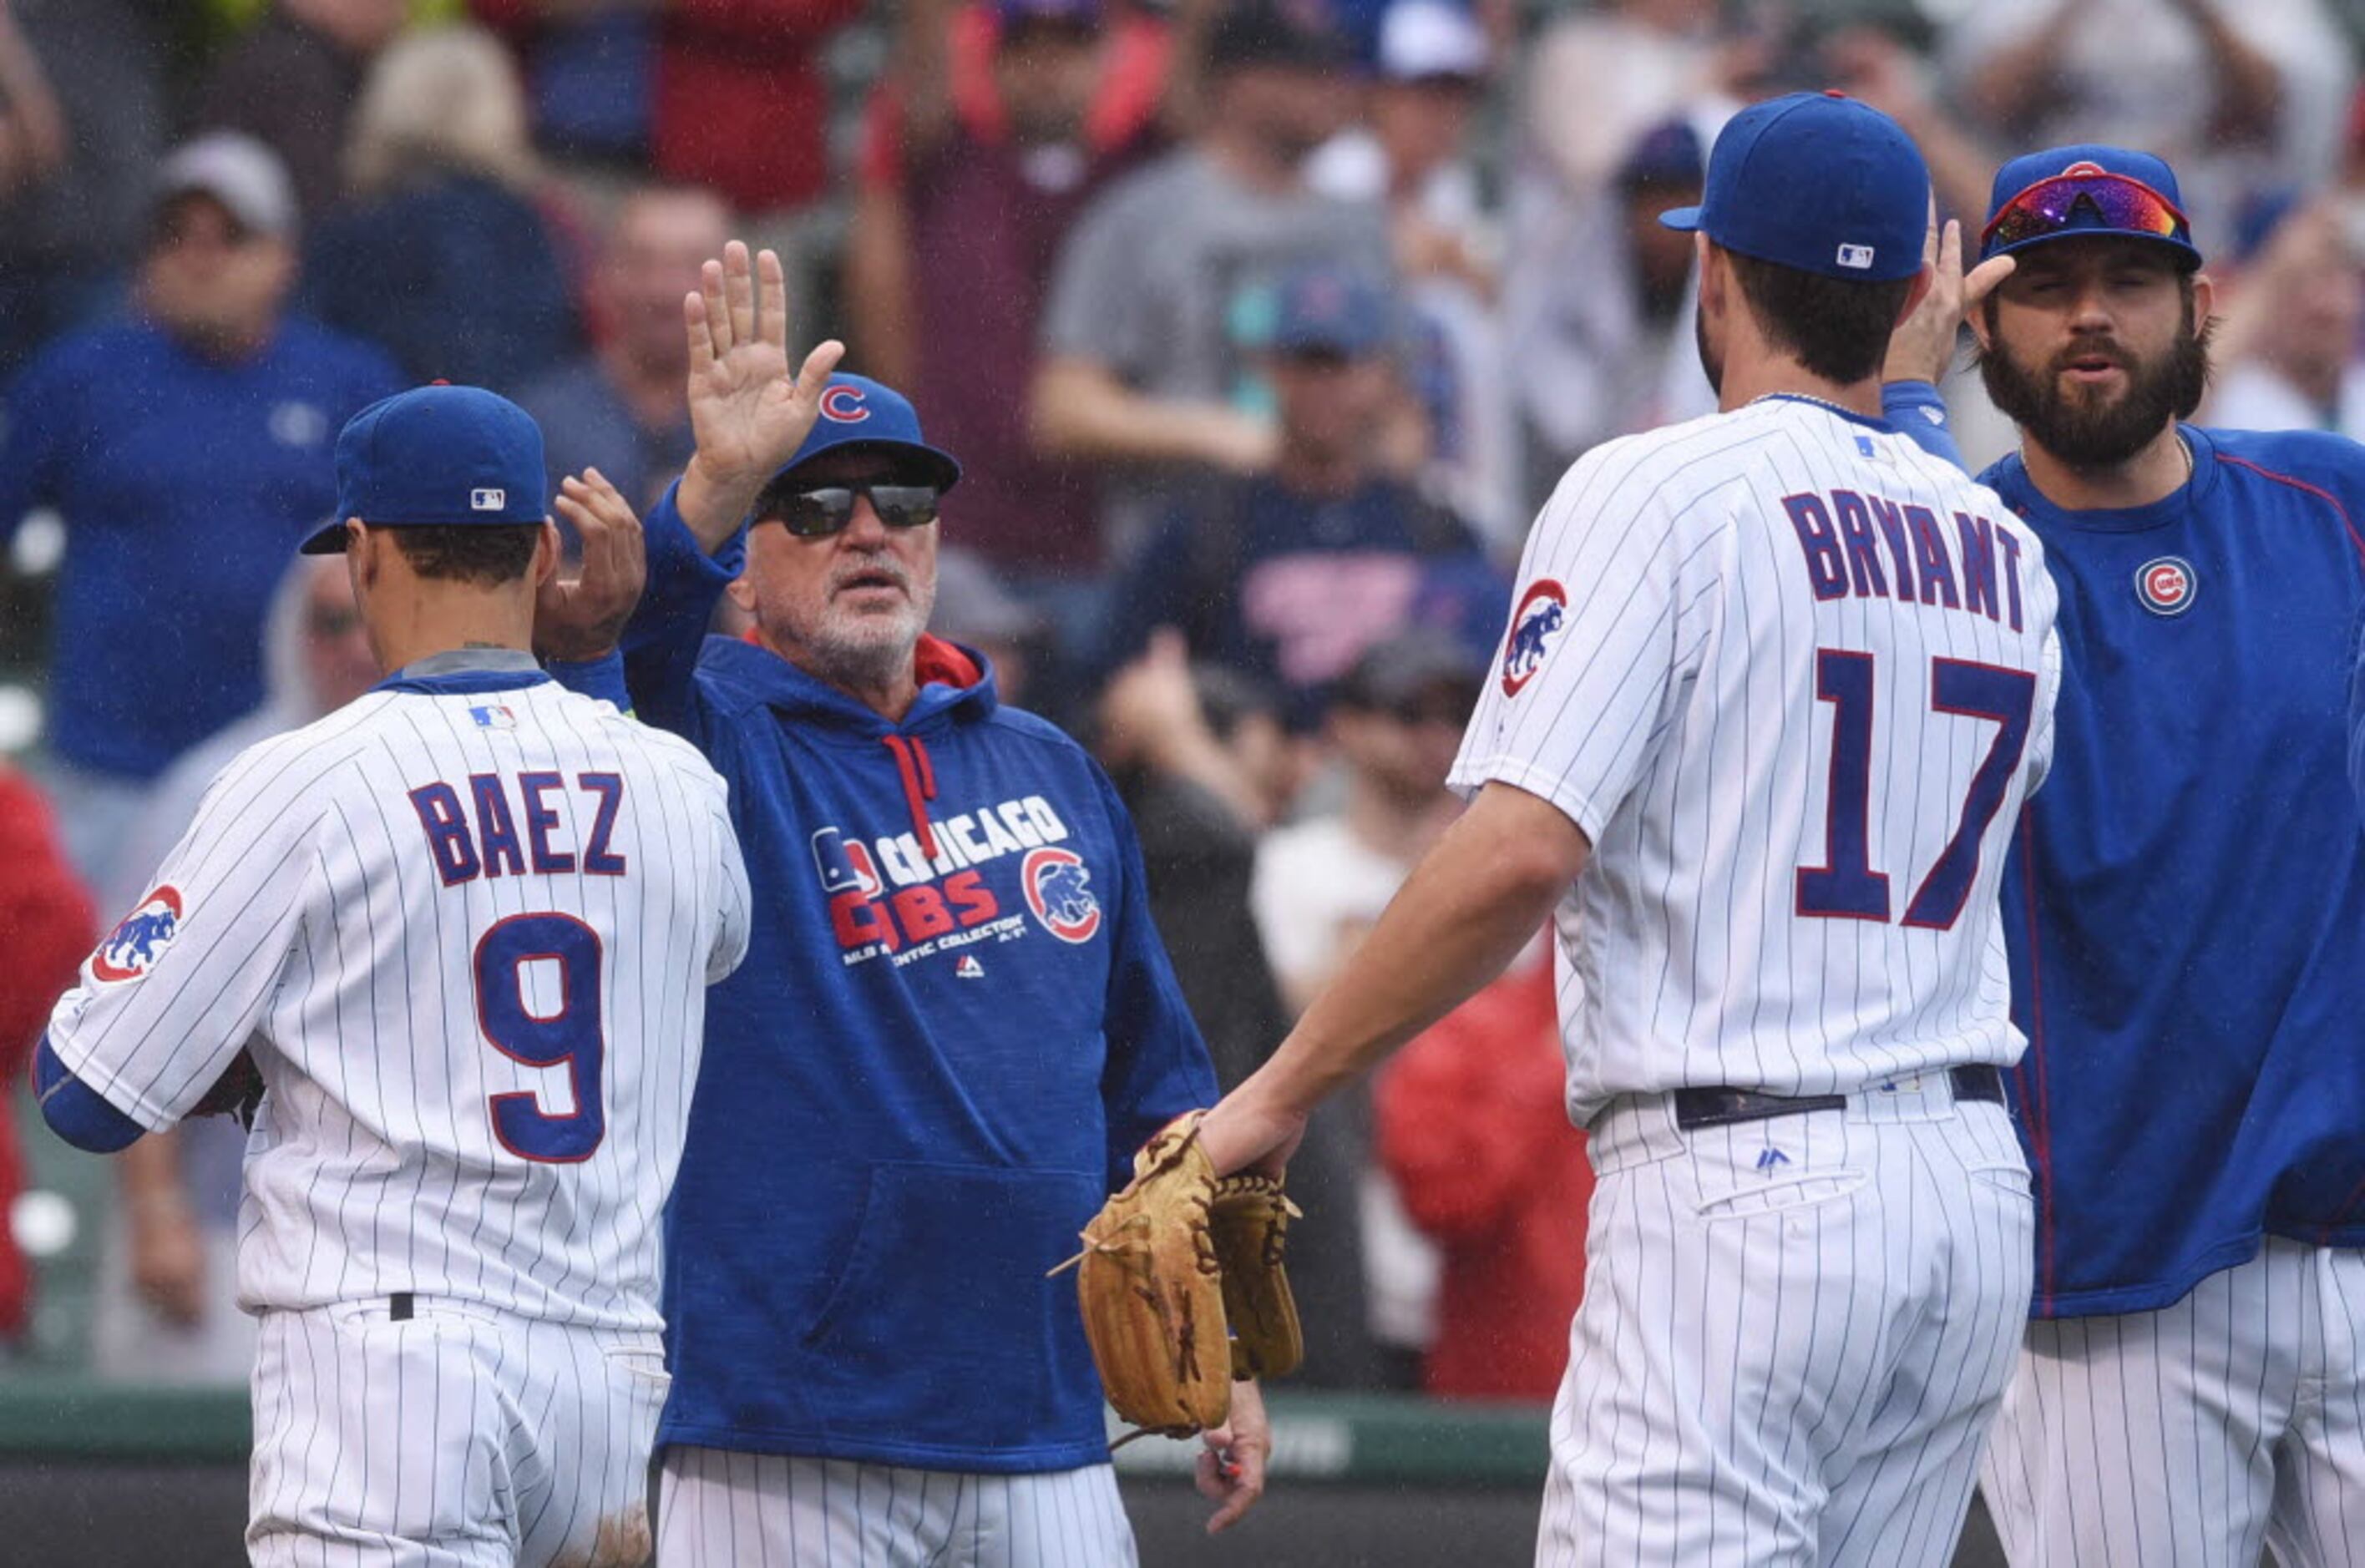 What CEOs could learn from the Cubs' Joe Maddon